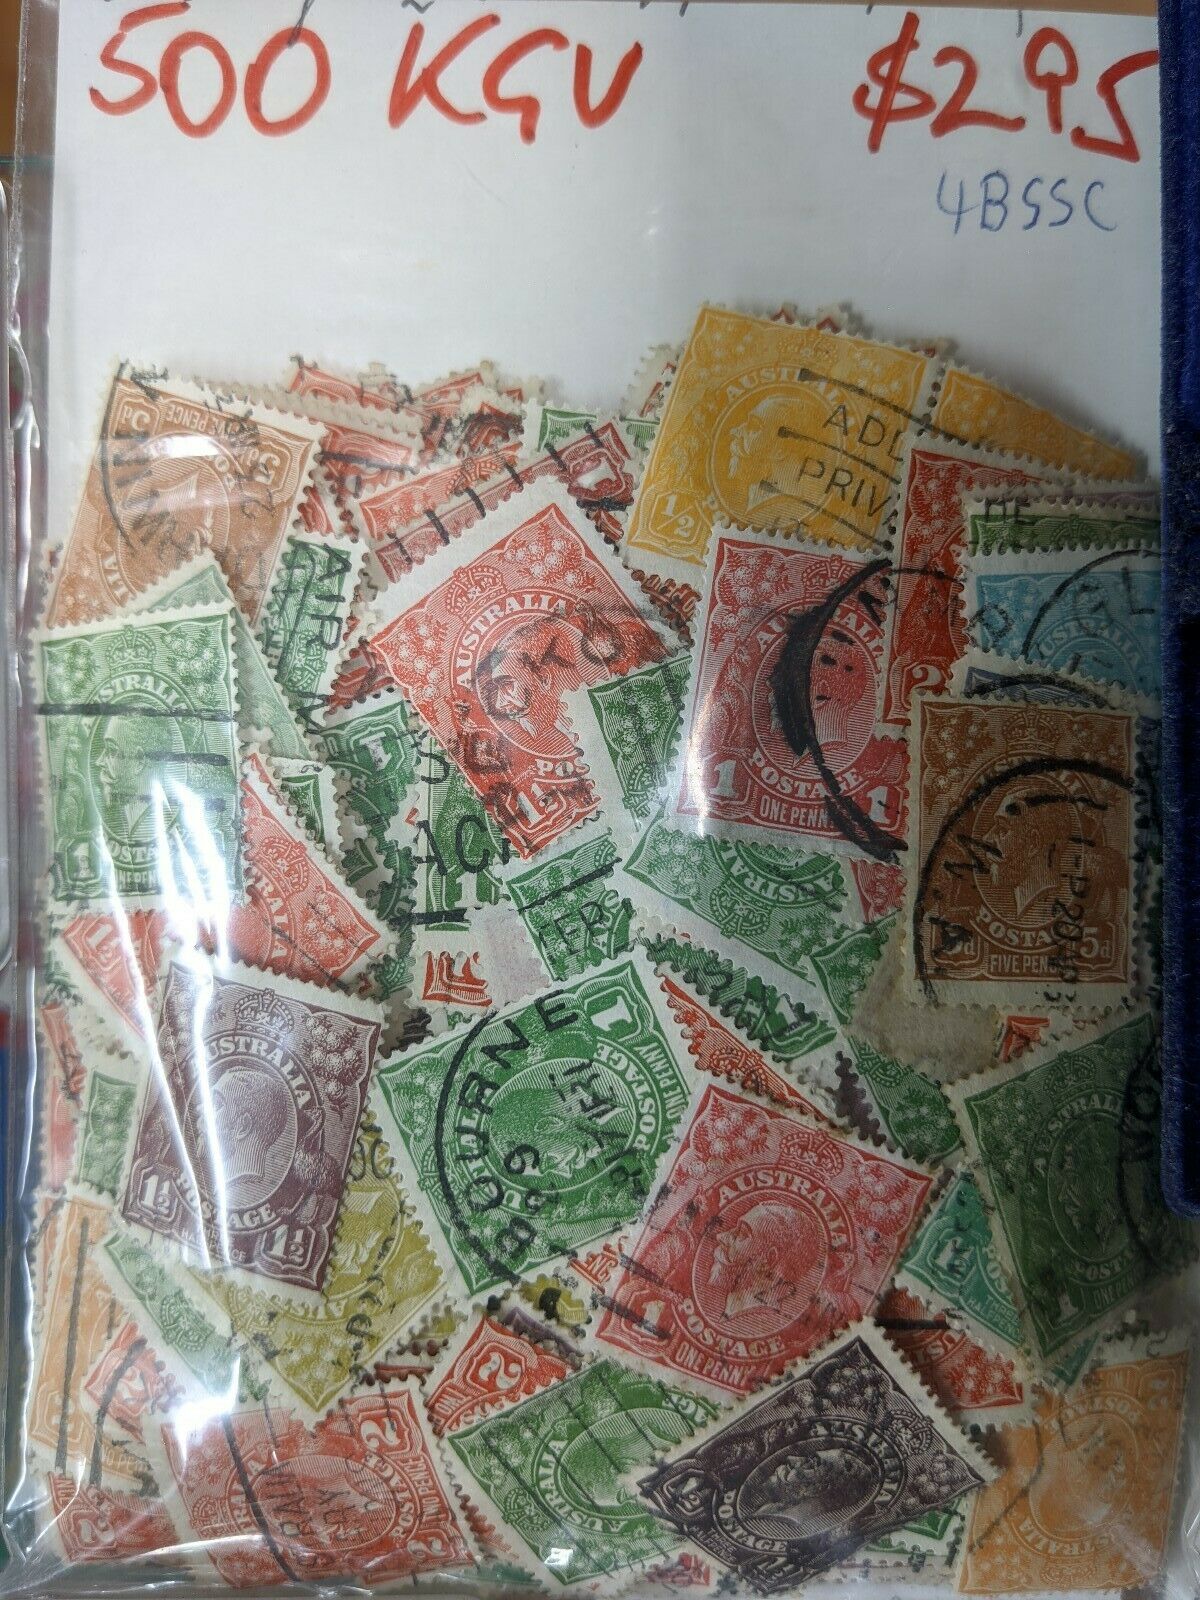 Australia 500 KGV Stamps Including a wide variety of values and postmarks